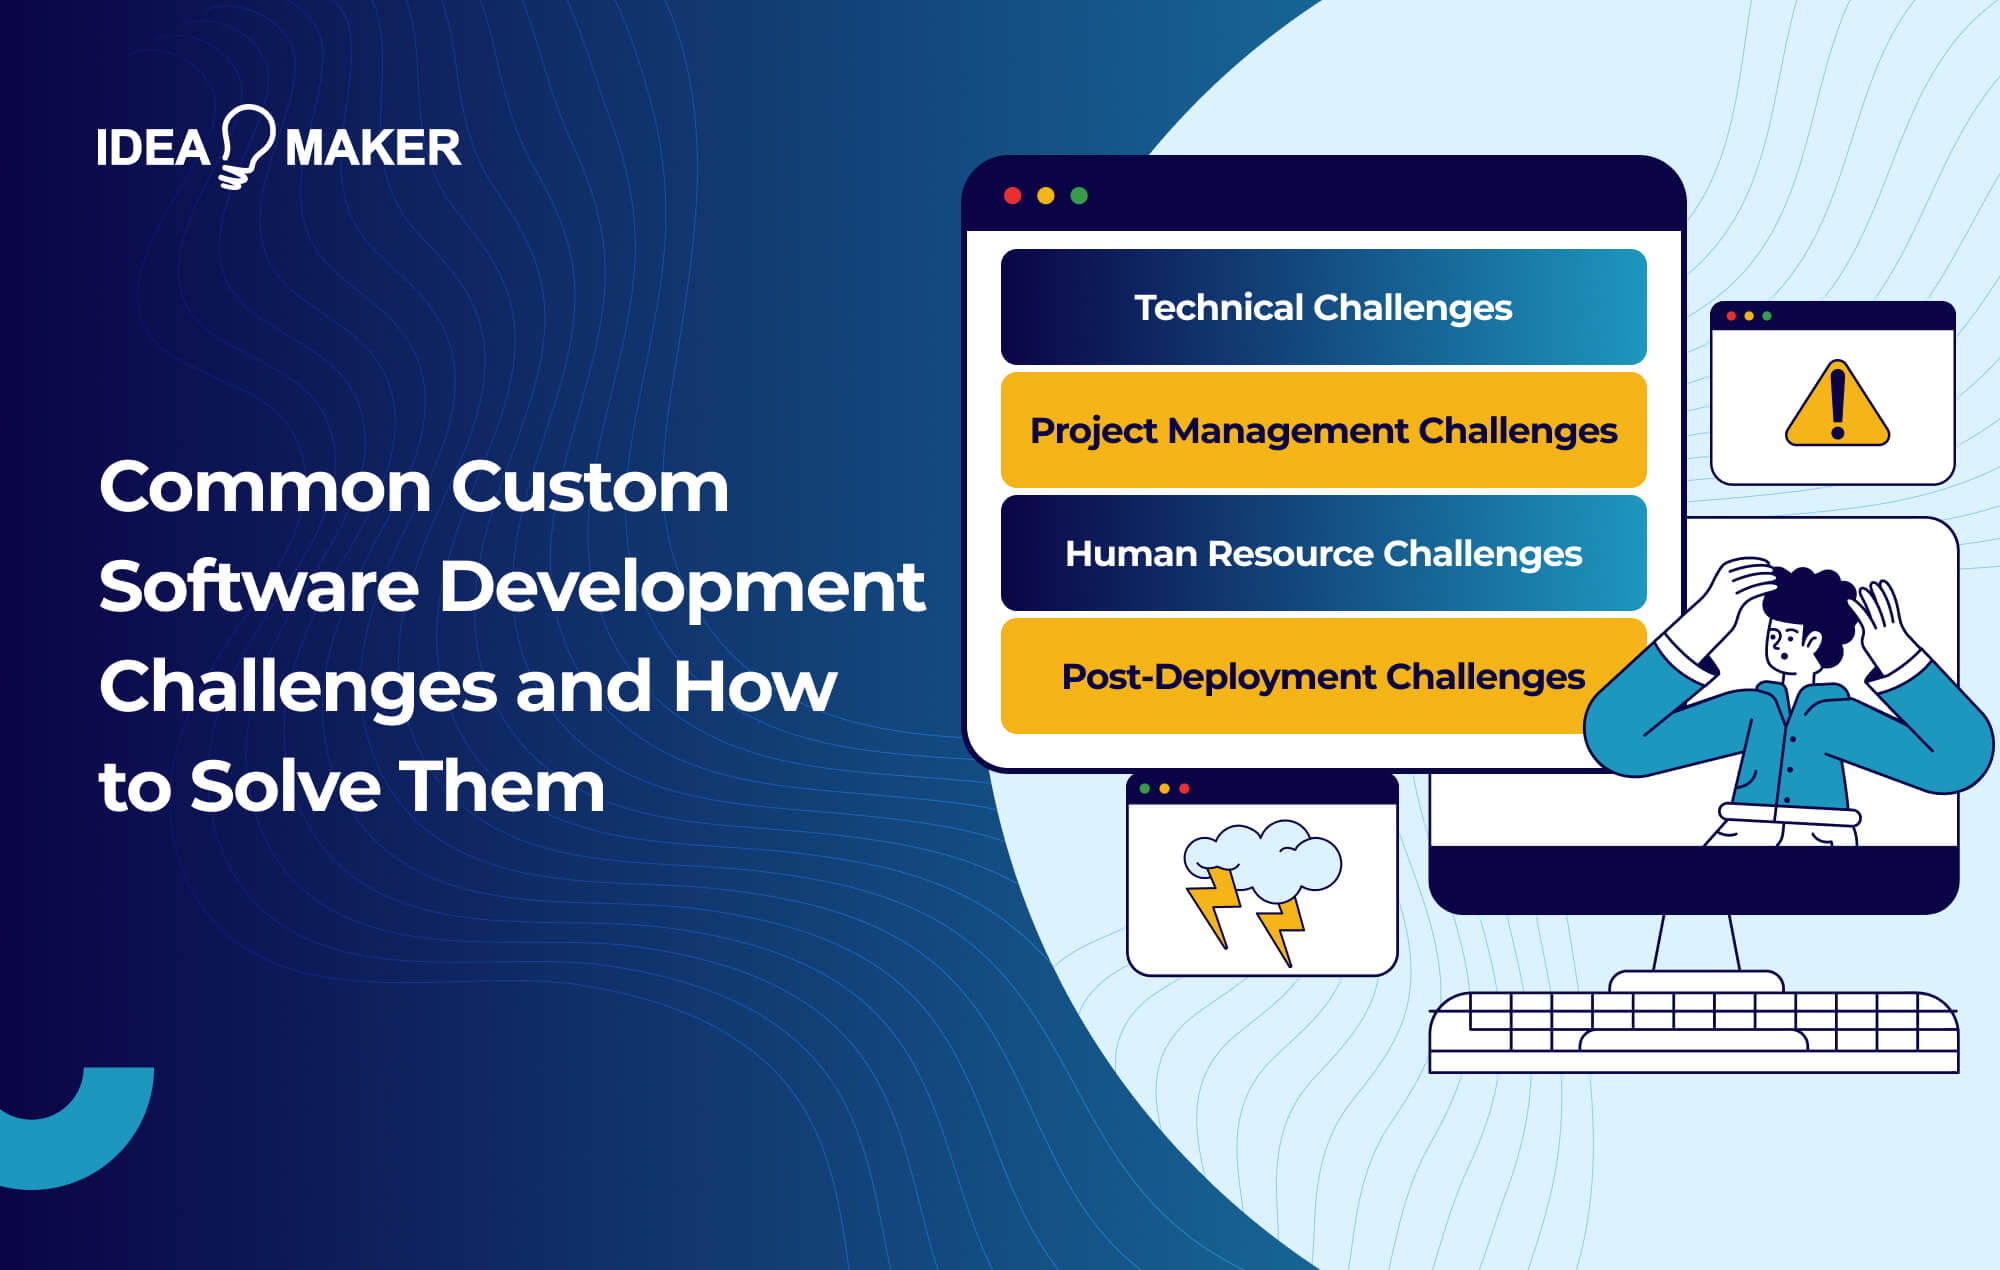 Common Custom Software Development Challenges and How to Solve Them